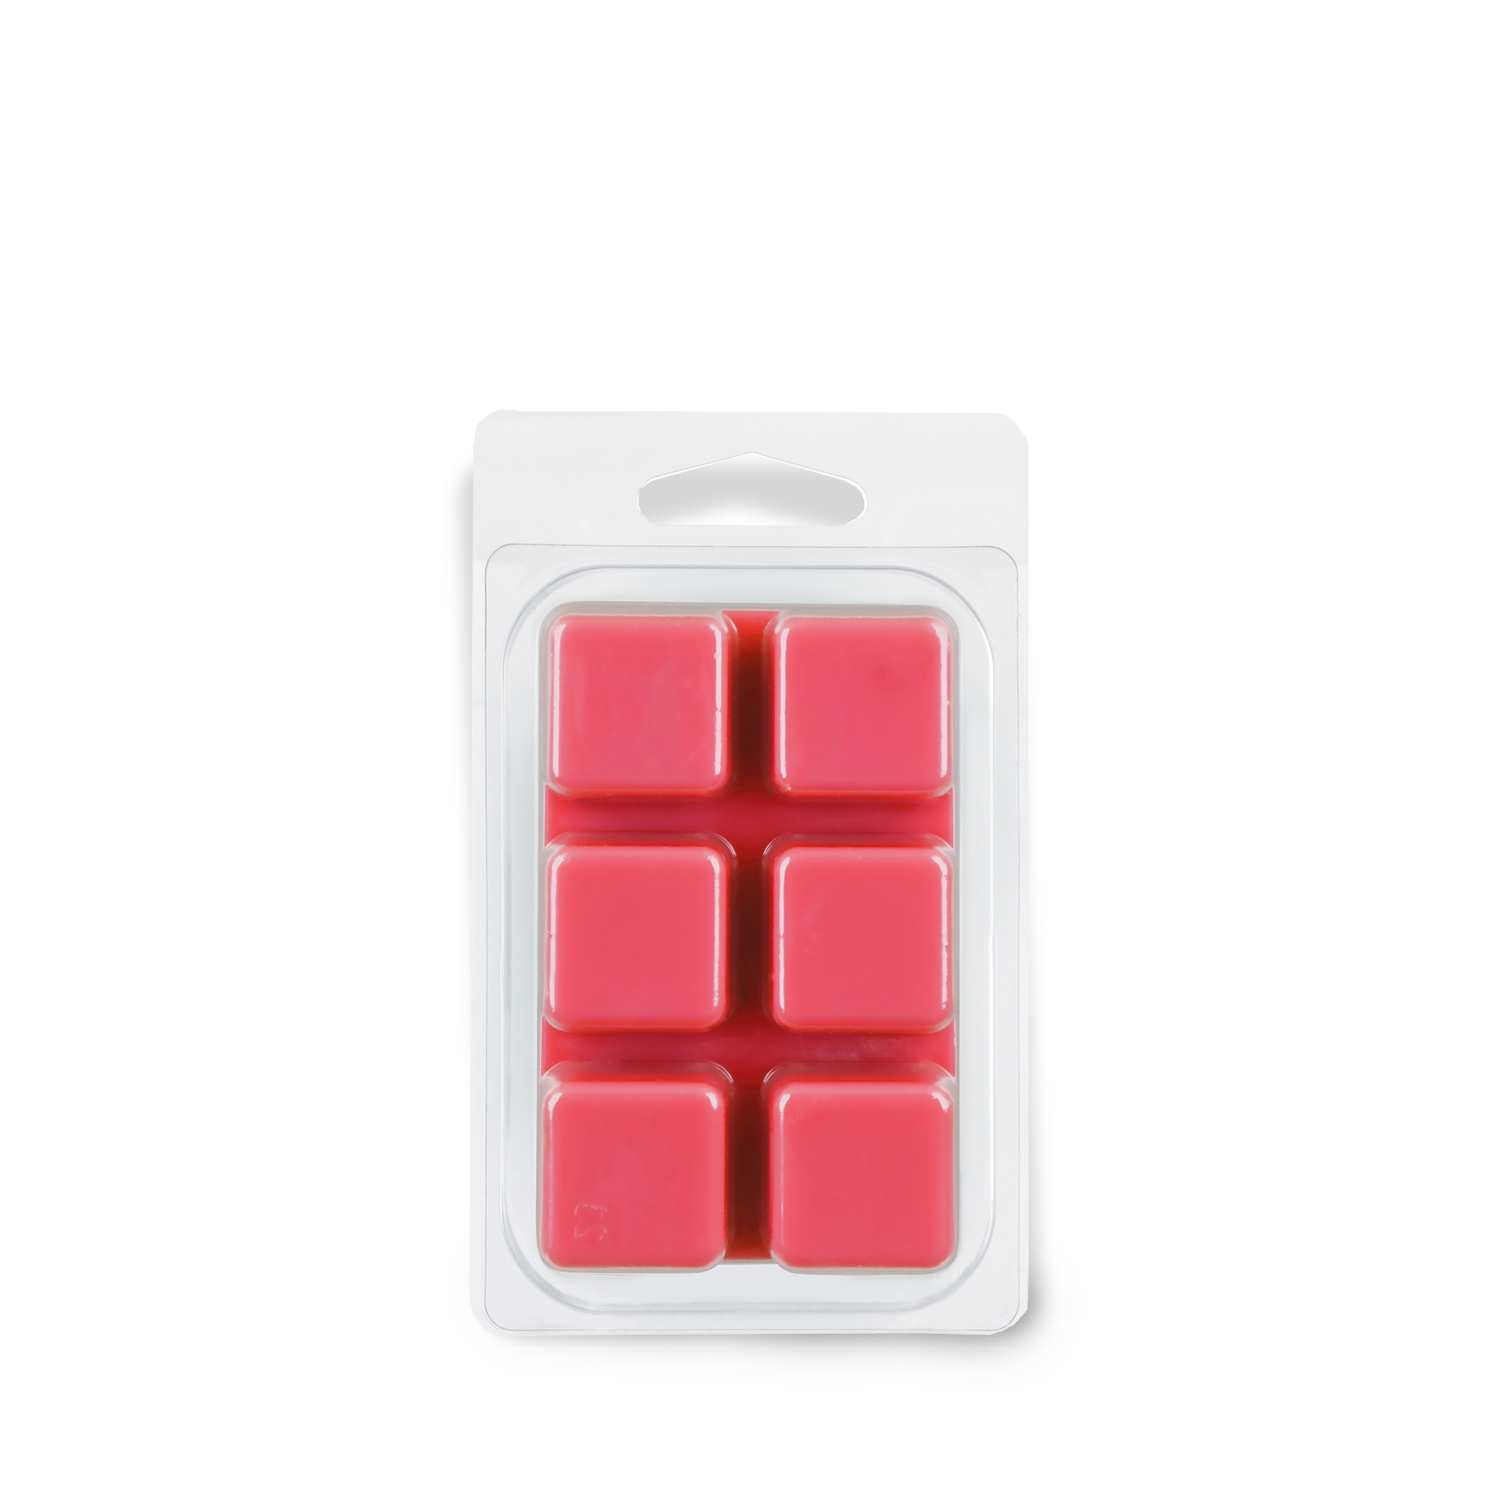 A pack of Pink Berry Fizz Scented Wax Melts from Tuscany Candle® SEASONAL on a white background.